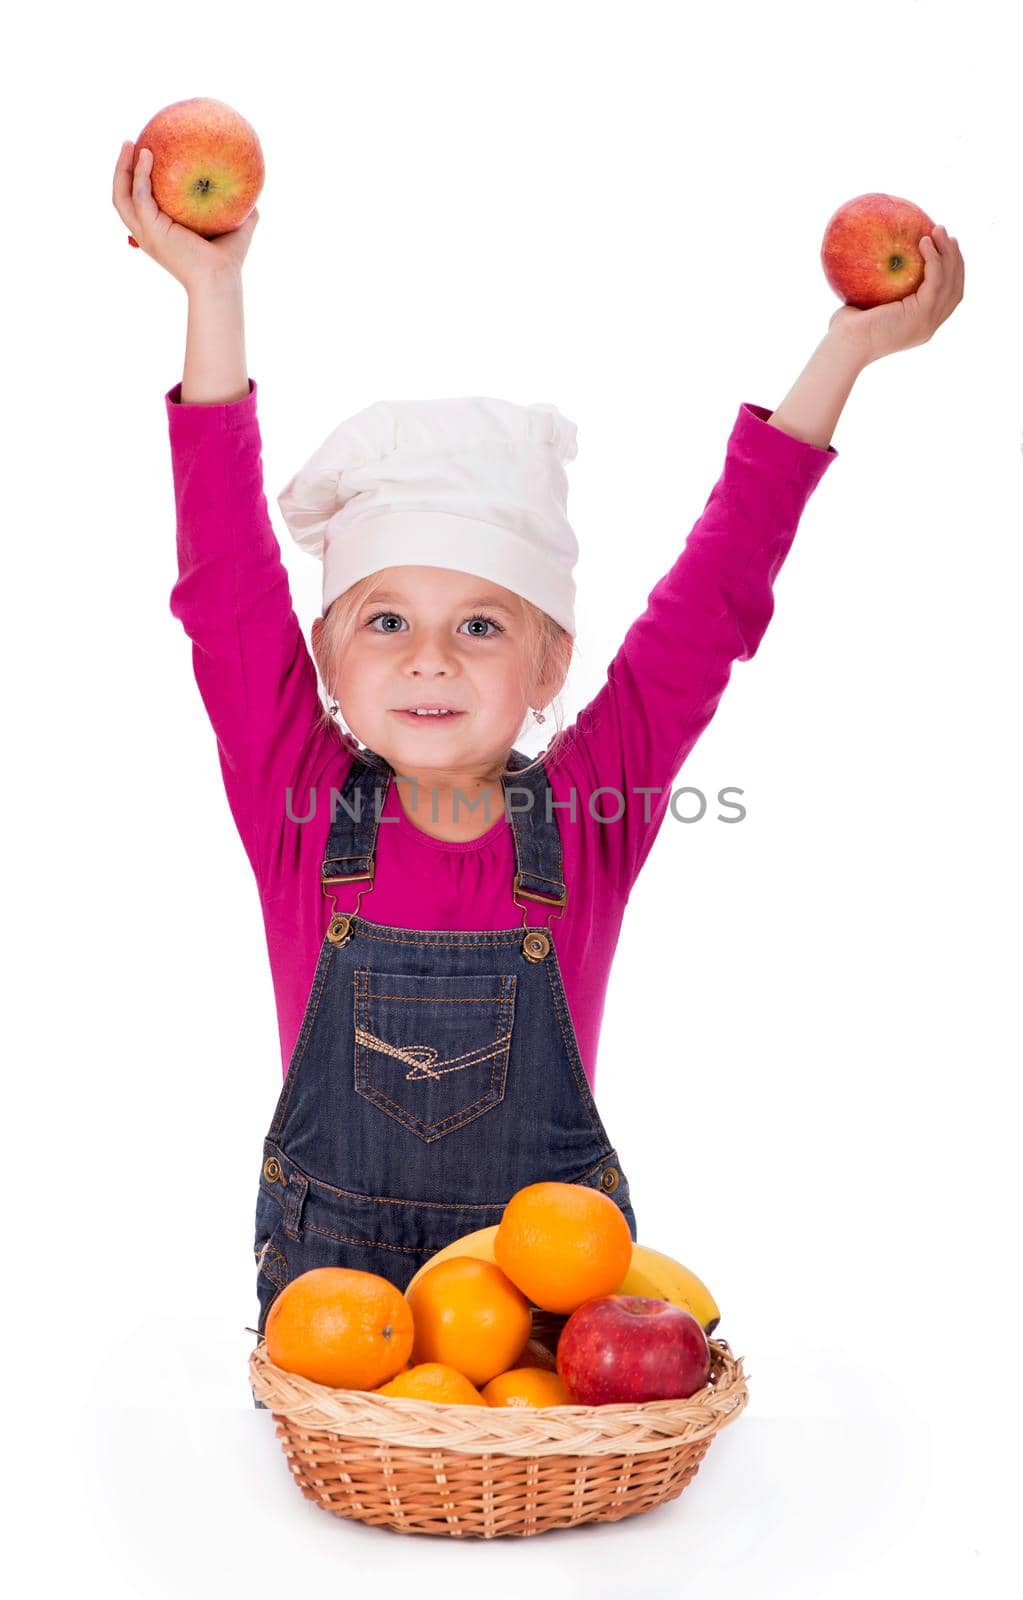 Close-up portrait of a little girl holding fruits - apples, bananas and oranges. Isolated on a light background. by aprilphoto